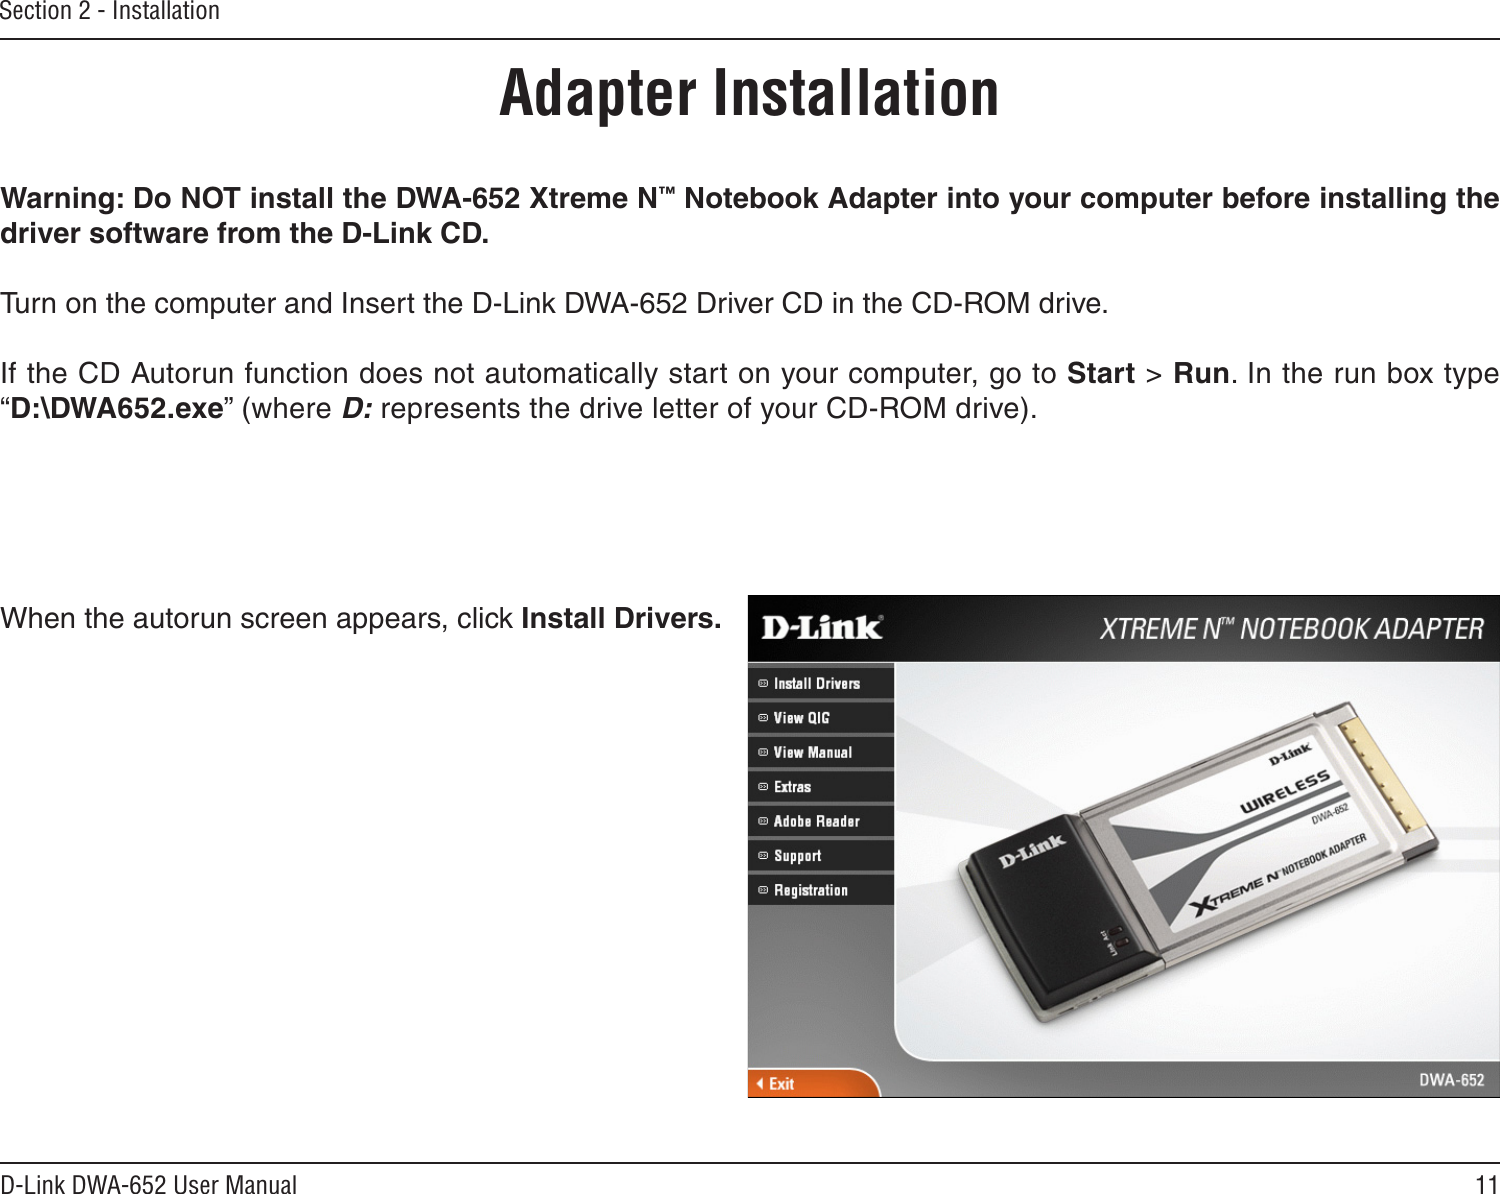 11D-Link DWA-652 User ManualSection 2 - InstallationWarning: Do NOT install the DWA-652 Xtreme N™ Notebook Adapter into your computer before installing the driver software from the D-Link CD.Turn on the computer and Insert the D-Link DWA-652 Driver CD in the CD-ROM drive. If the CD Autorun function does not automatically start on your computer, go to Start &gt; Run. In the run box type “D:\DWA652.exe” (where D: represents the drive letter of your CD-ROM drive).When the autorun screen appears, click Install Drivers.Adapter Installation